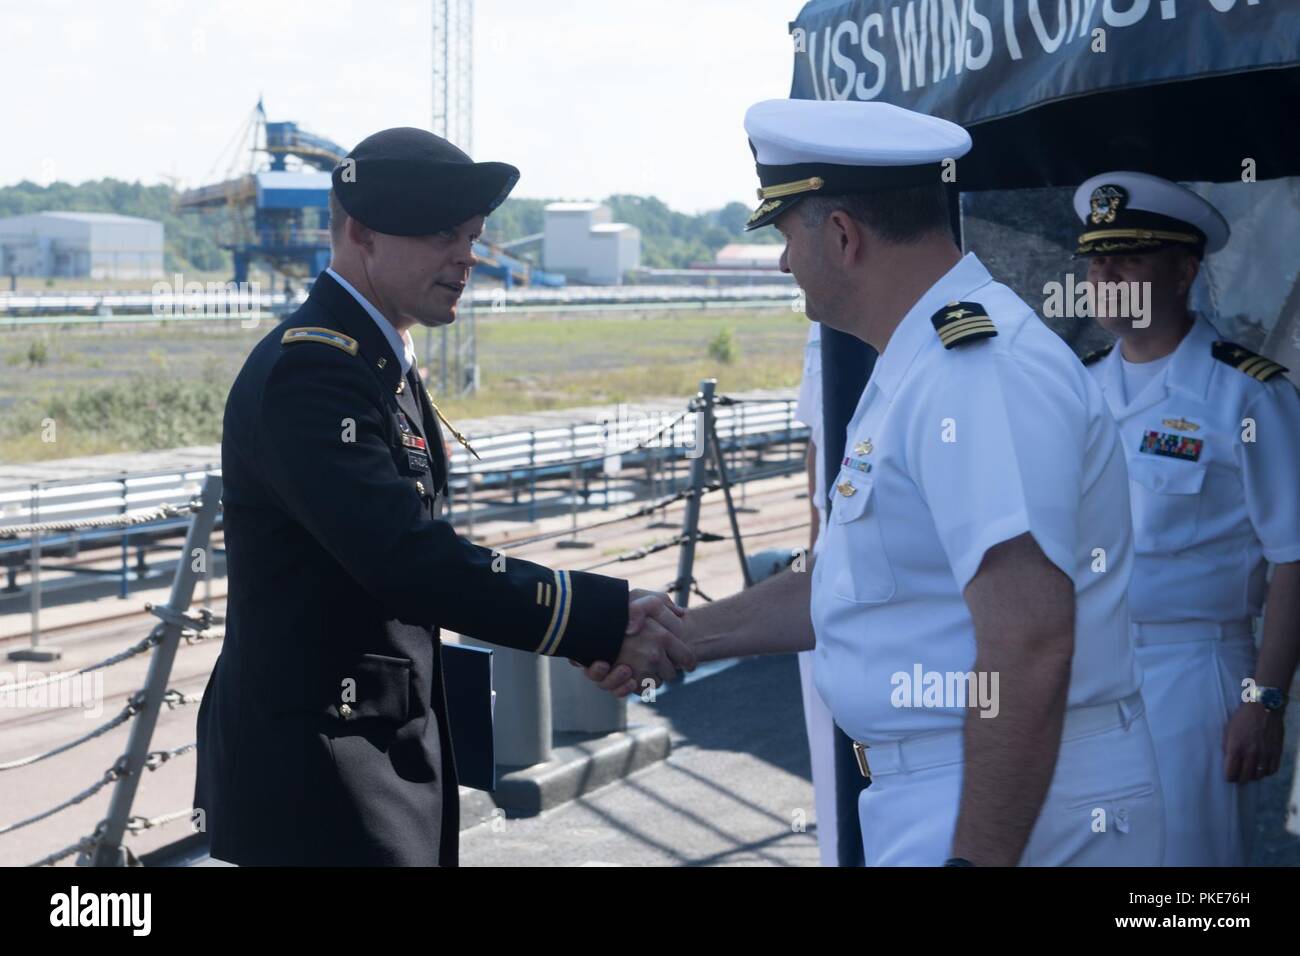 TALLINN, Estonia (July 25, 2018) Cmdr. Thomas Van Scoten, commanding  officer of the Arleigh Burke-class guided-missile destroyer USS Winston S.  Churchill (DDG 81), greets guests during a reception aboard the ship, July